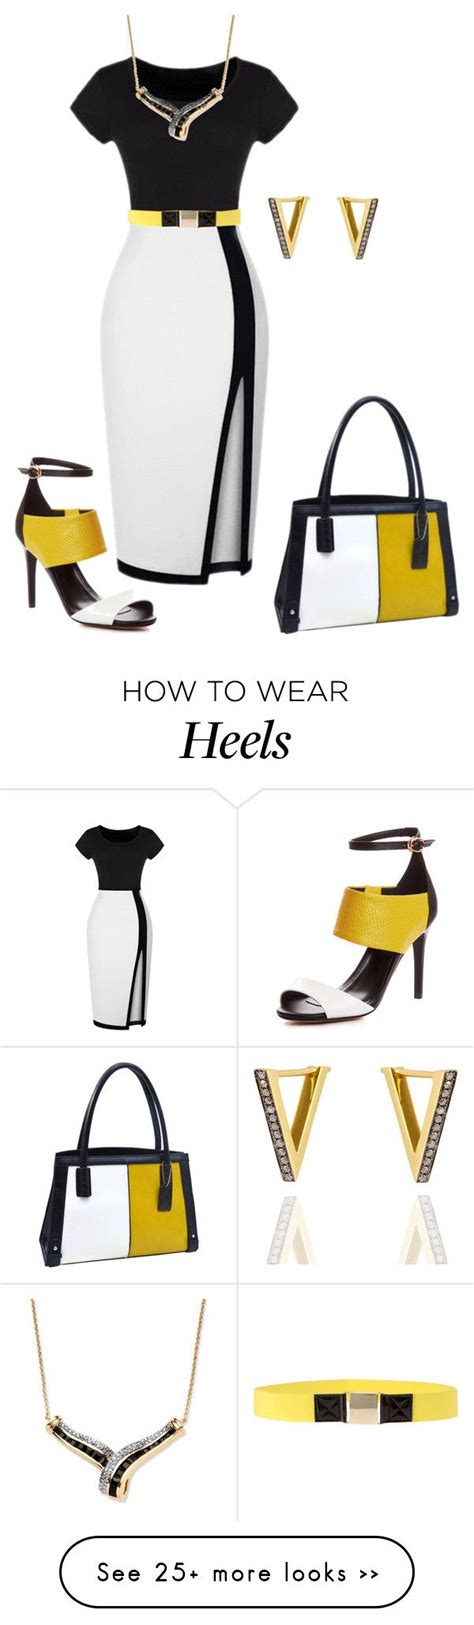 heel matching by najoli on polyvore featuring msgm palm